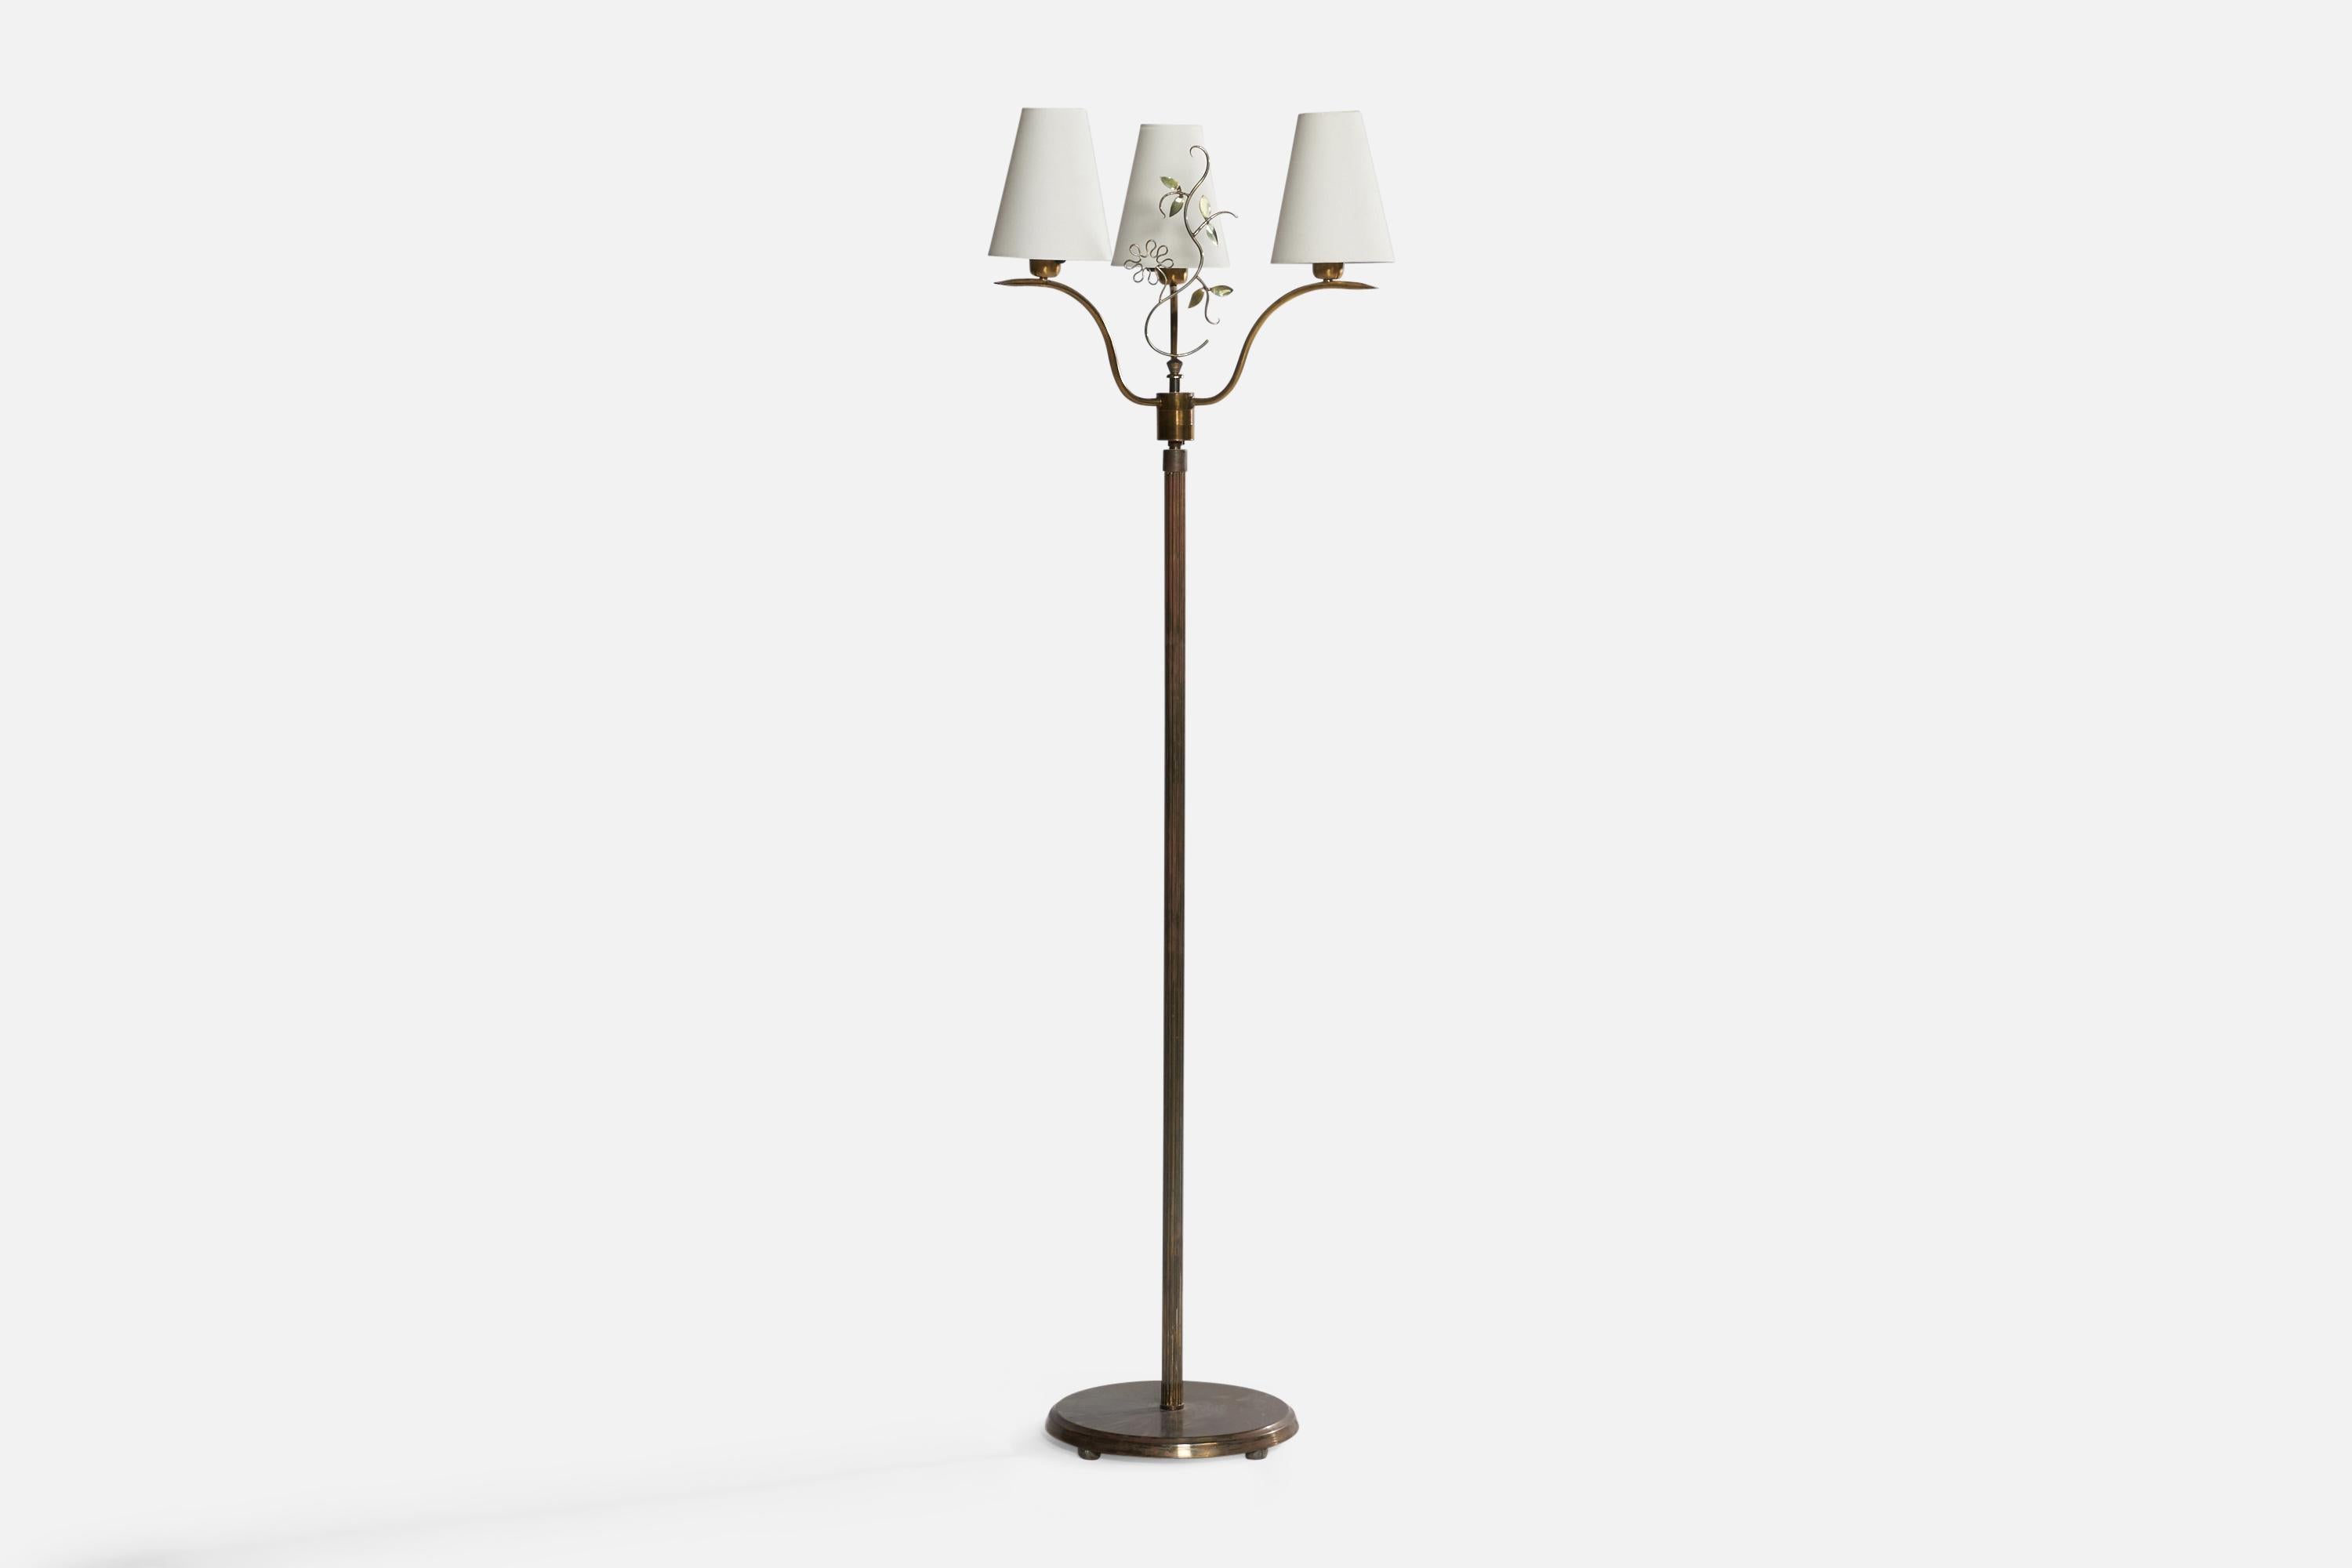 A brass and fabric floor lamp designed and produced in Sweden, c. 1930s.

Overall Dimensions (inches): 61.45” H x 18” W x 18”. Stated dimensions include shades.
Bulb Specifications: E-26 Bulb
Number of Sockets: 3
All lighting will be converted for